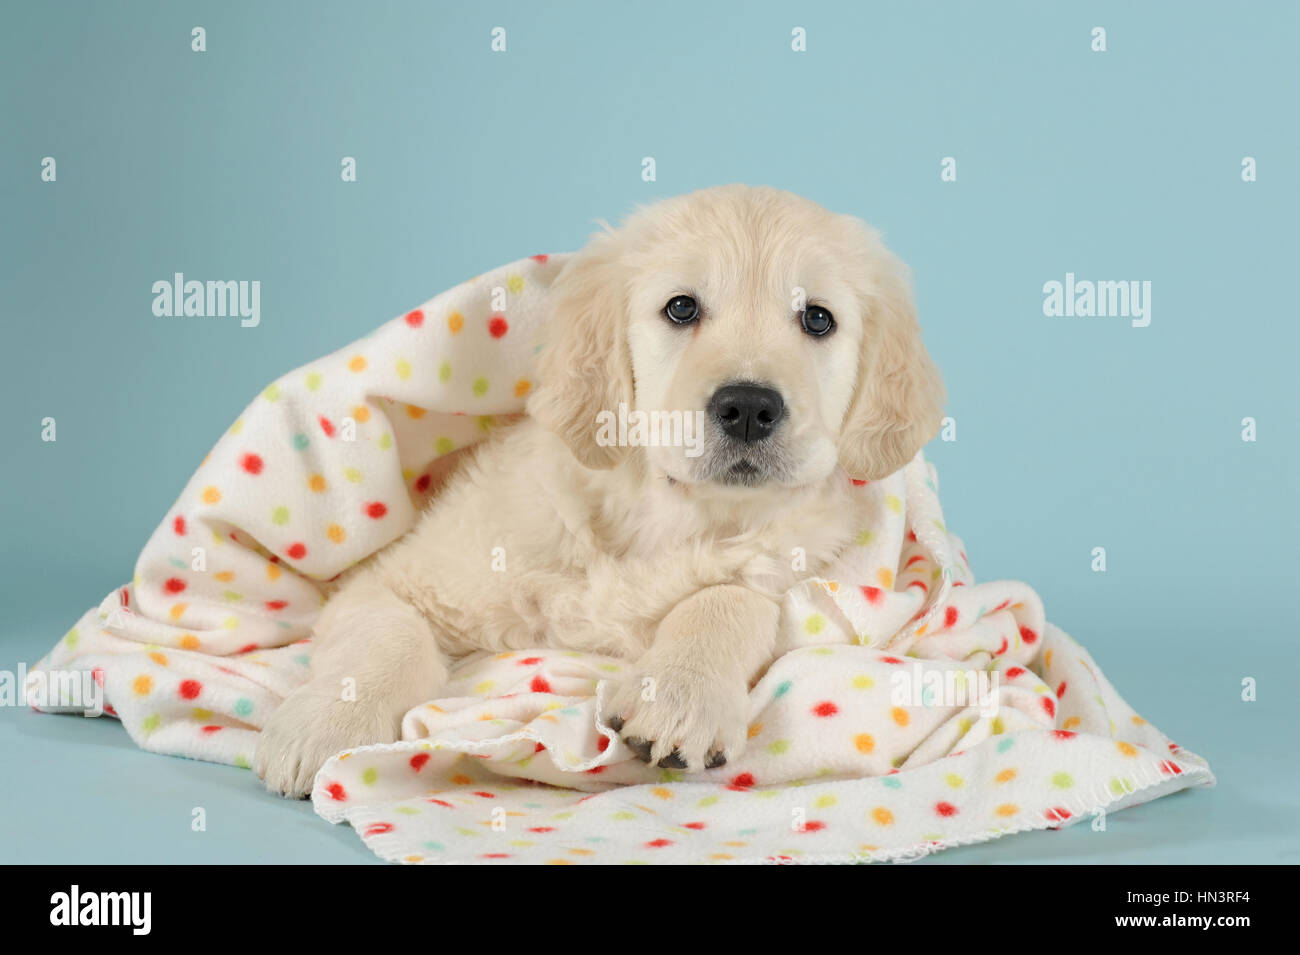 Golden Retriever, puppy lying with polka-dotted blanket Stock Photo